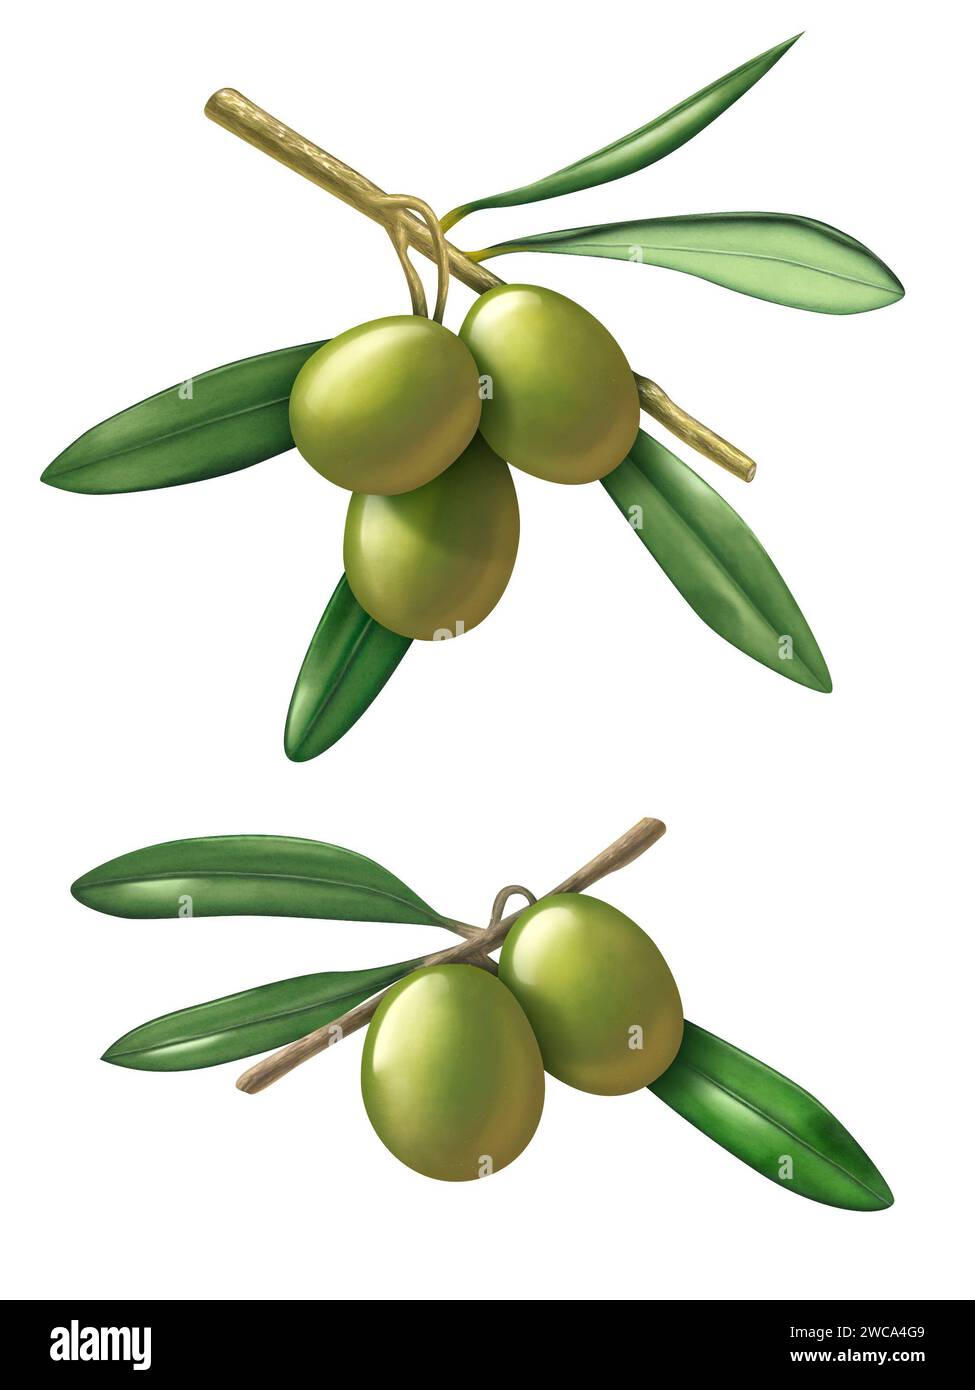 Some olive branches. Digital illustration with clipping path included. Stock Photo